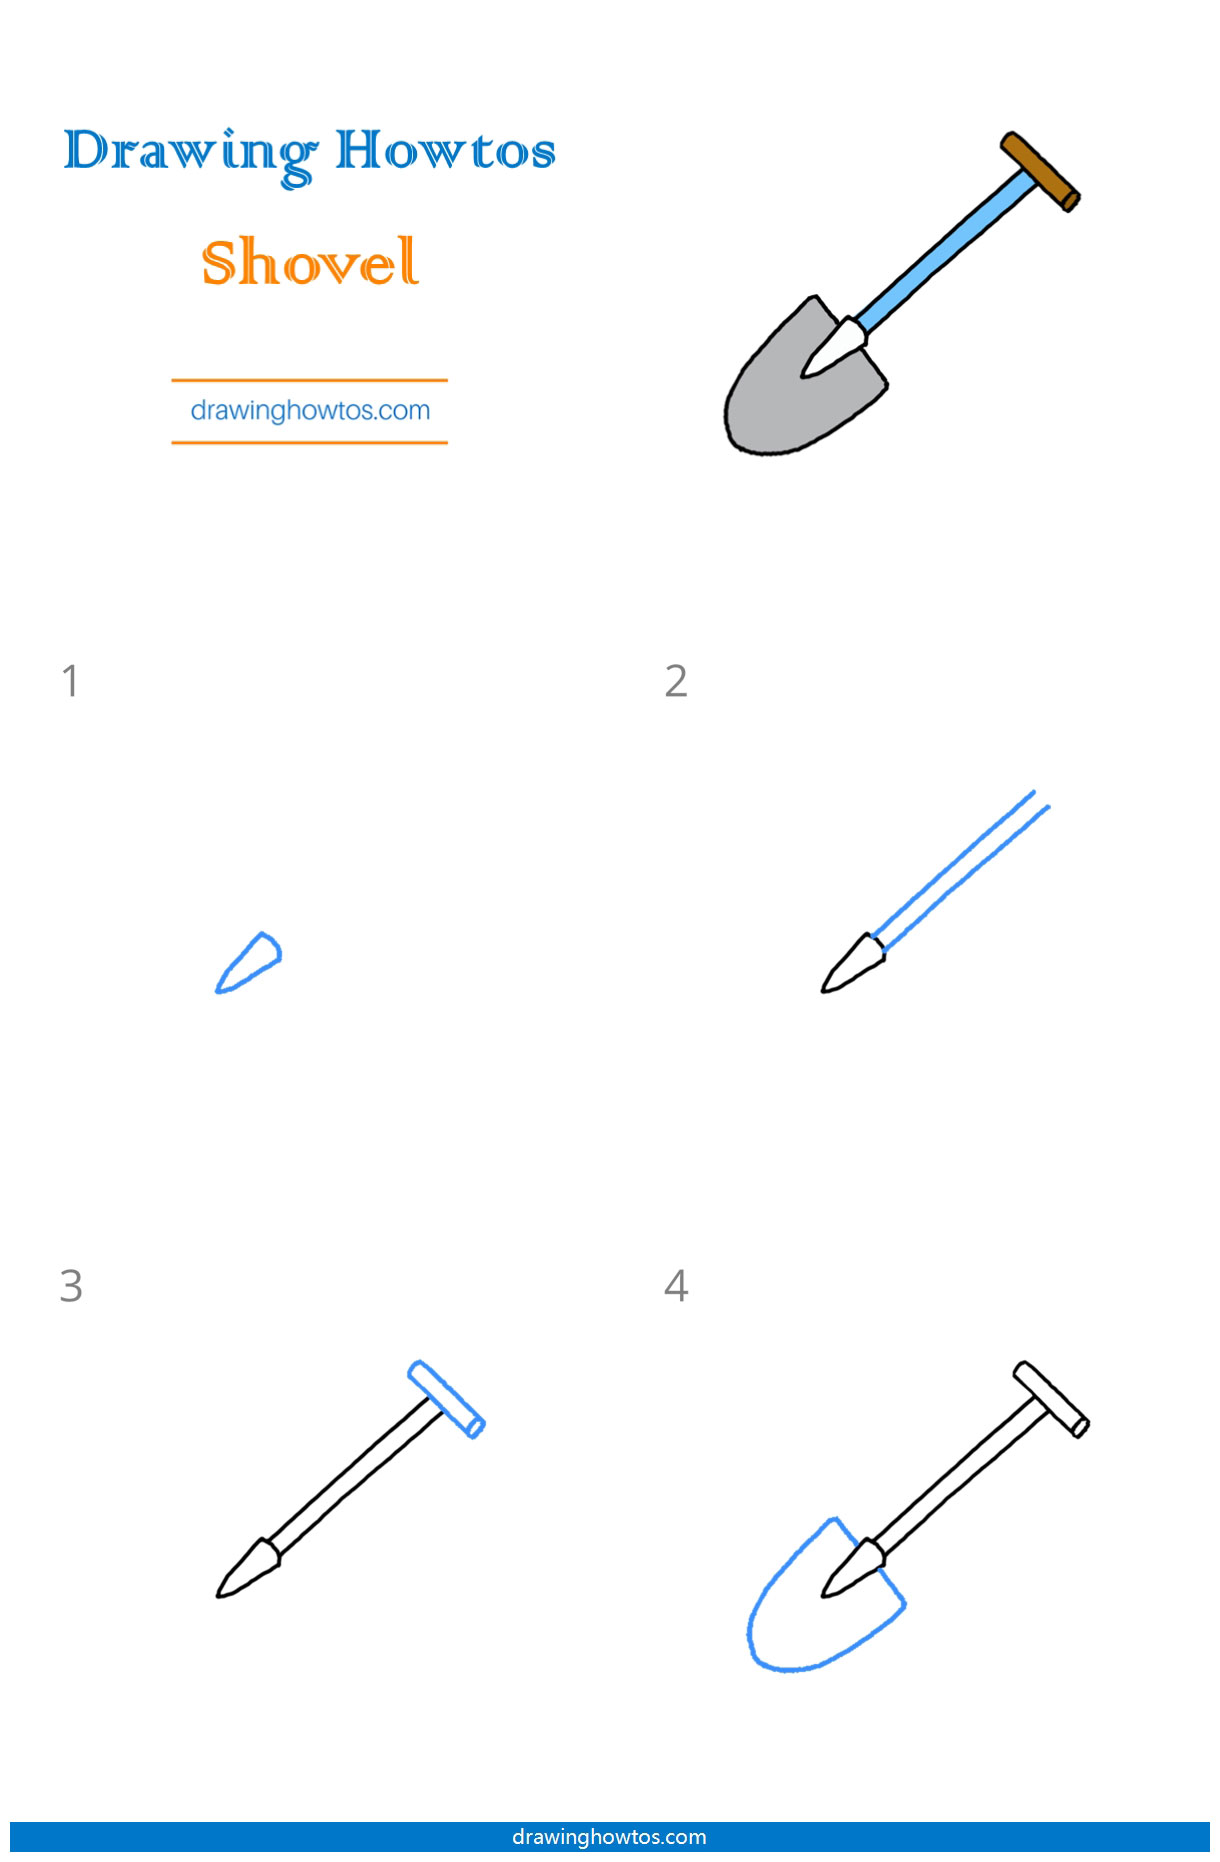 How to Draw a Shovel - Step by Step Easy Drawing Guides - Drawing Howtos